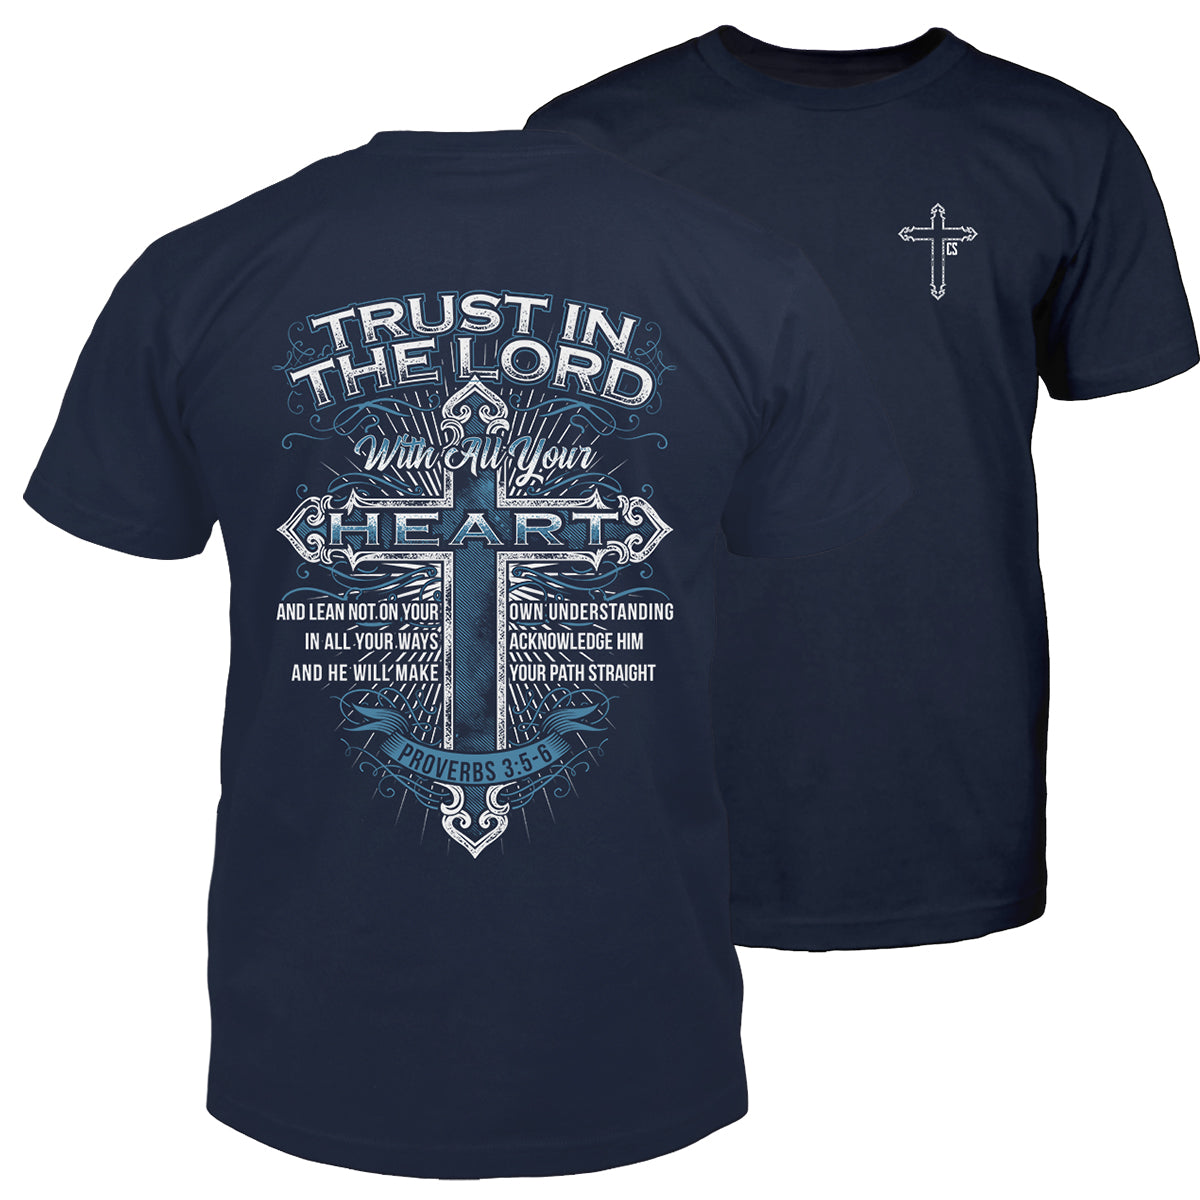 Trust in the Lord - With All Your Heart T-Shirt